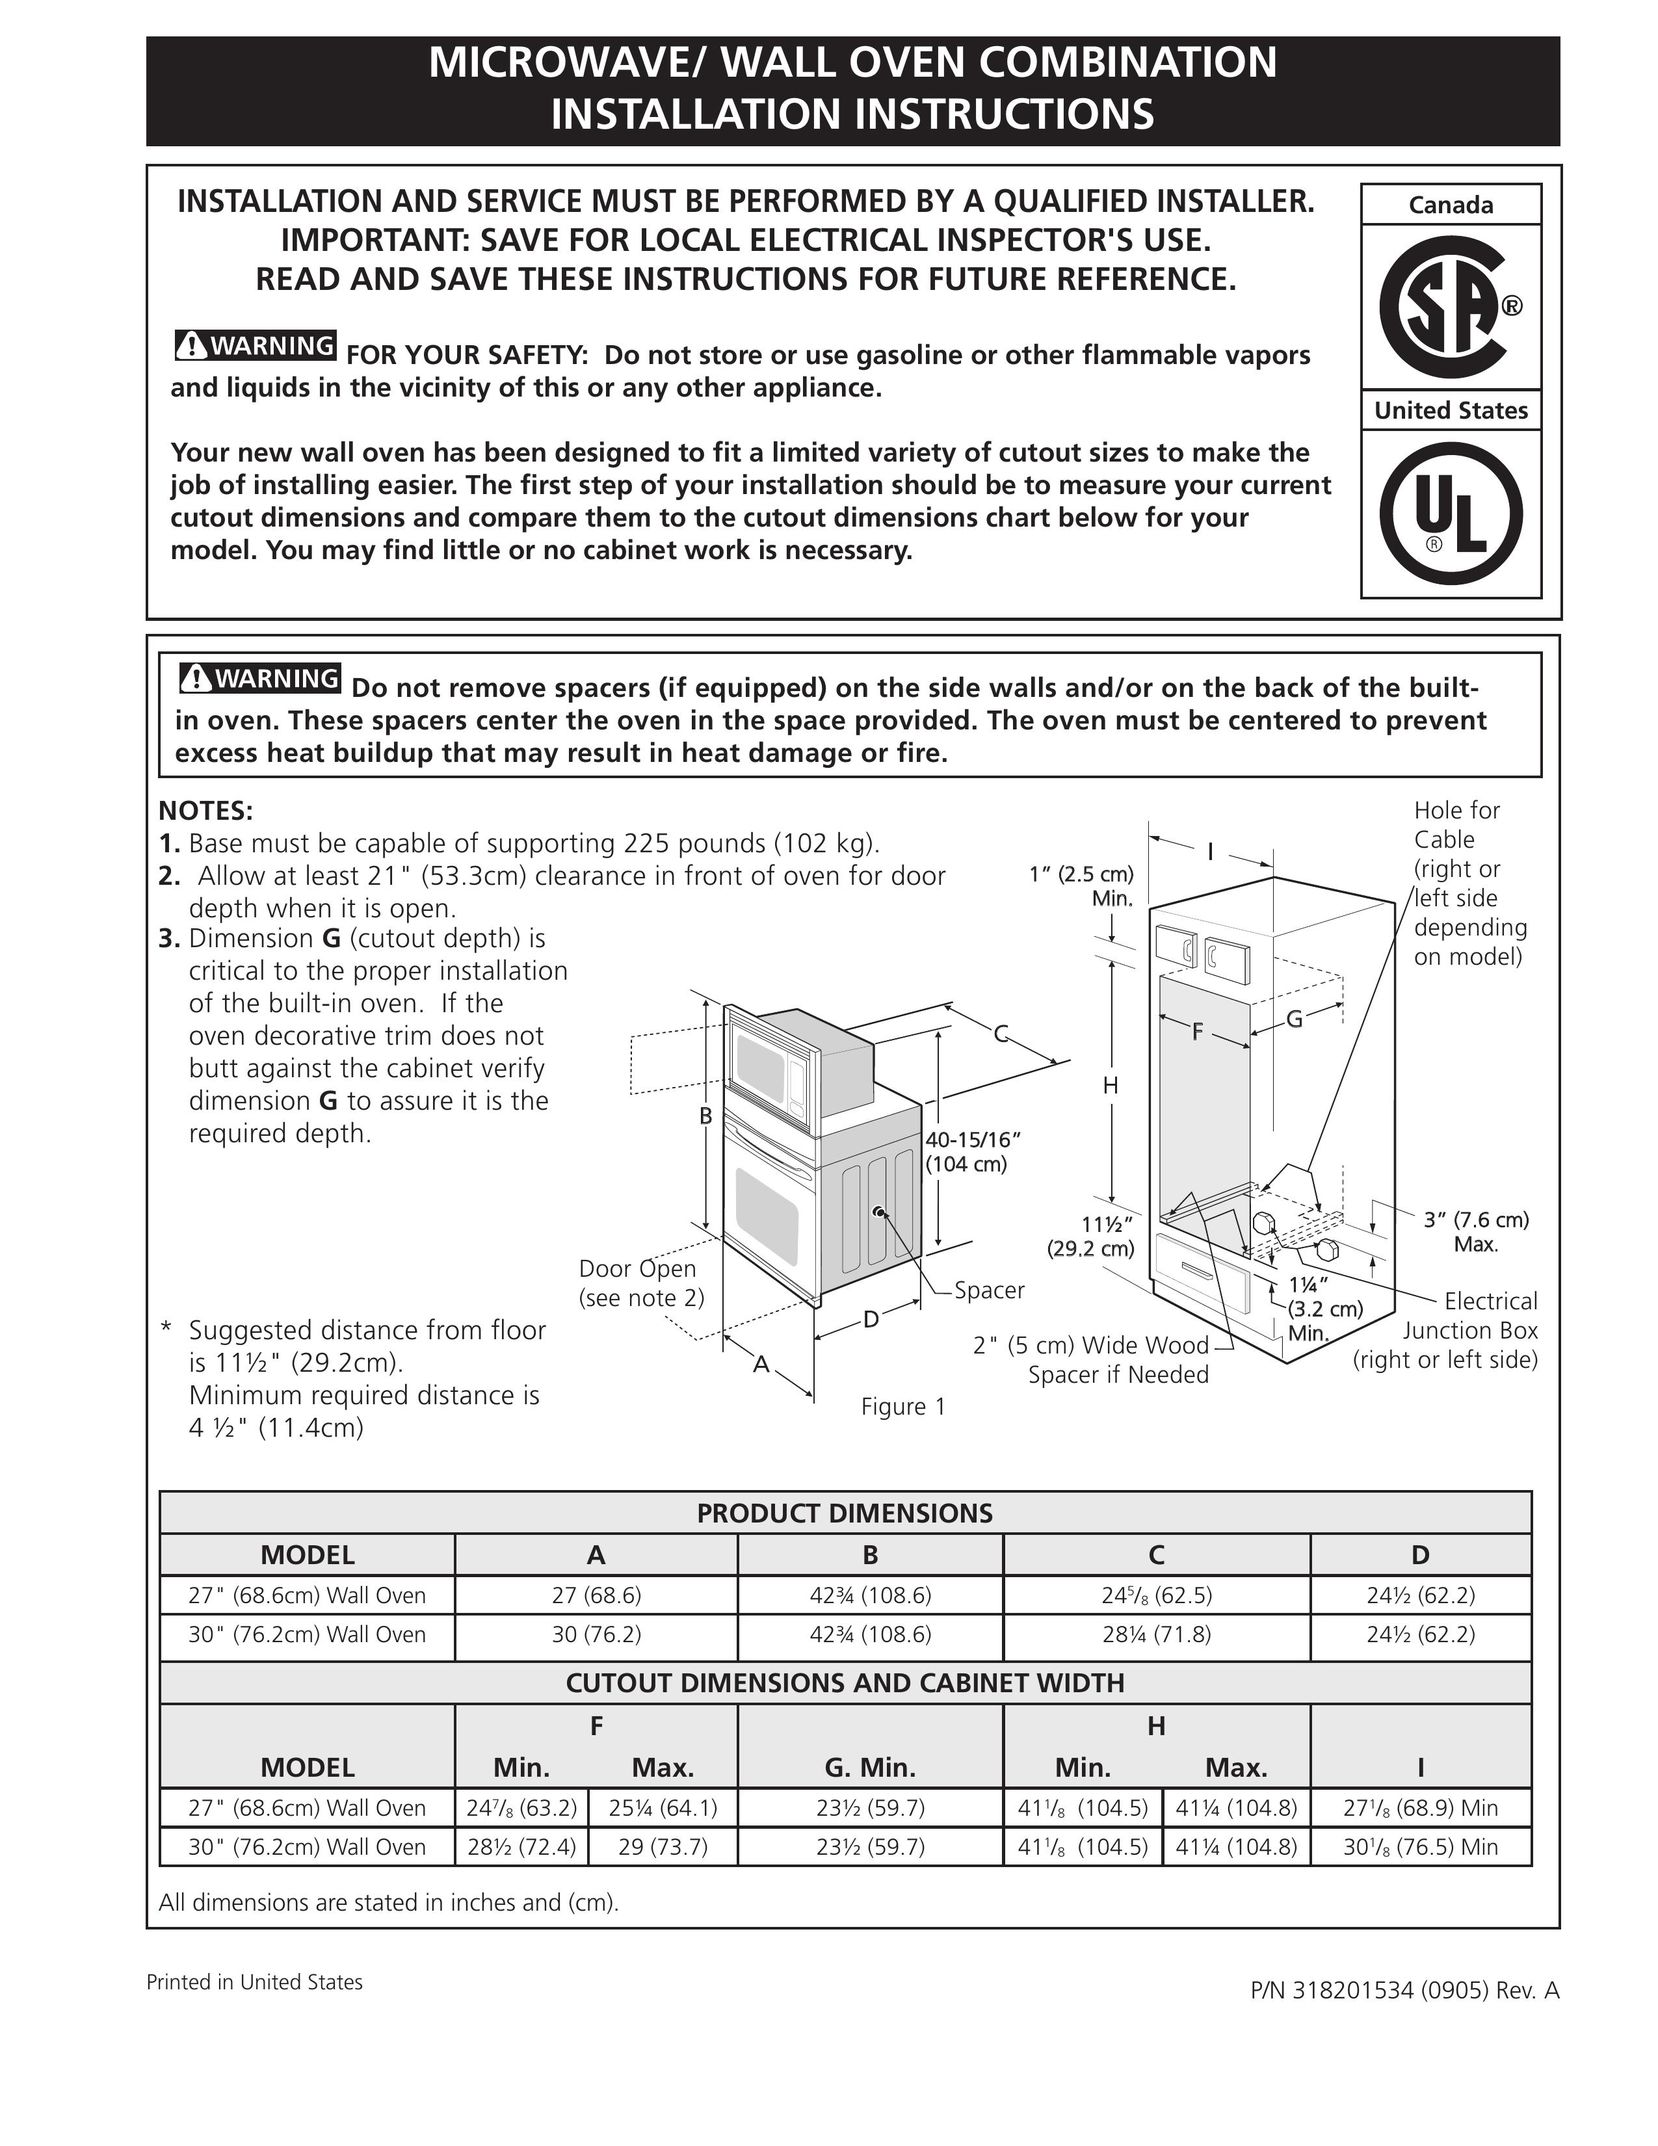 Frigidaire 318201534 Microwave Oven User Manual